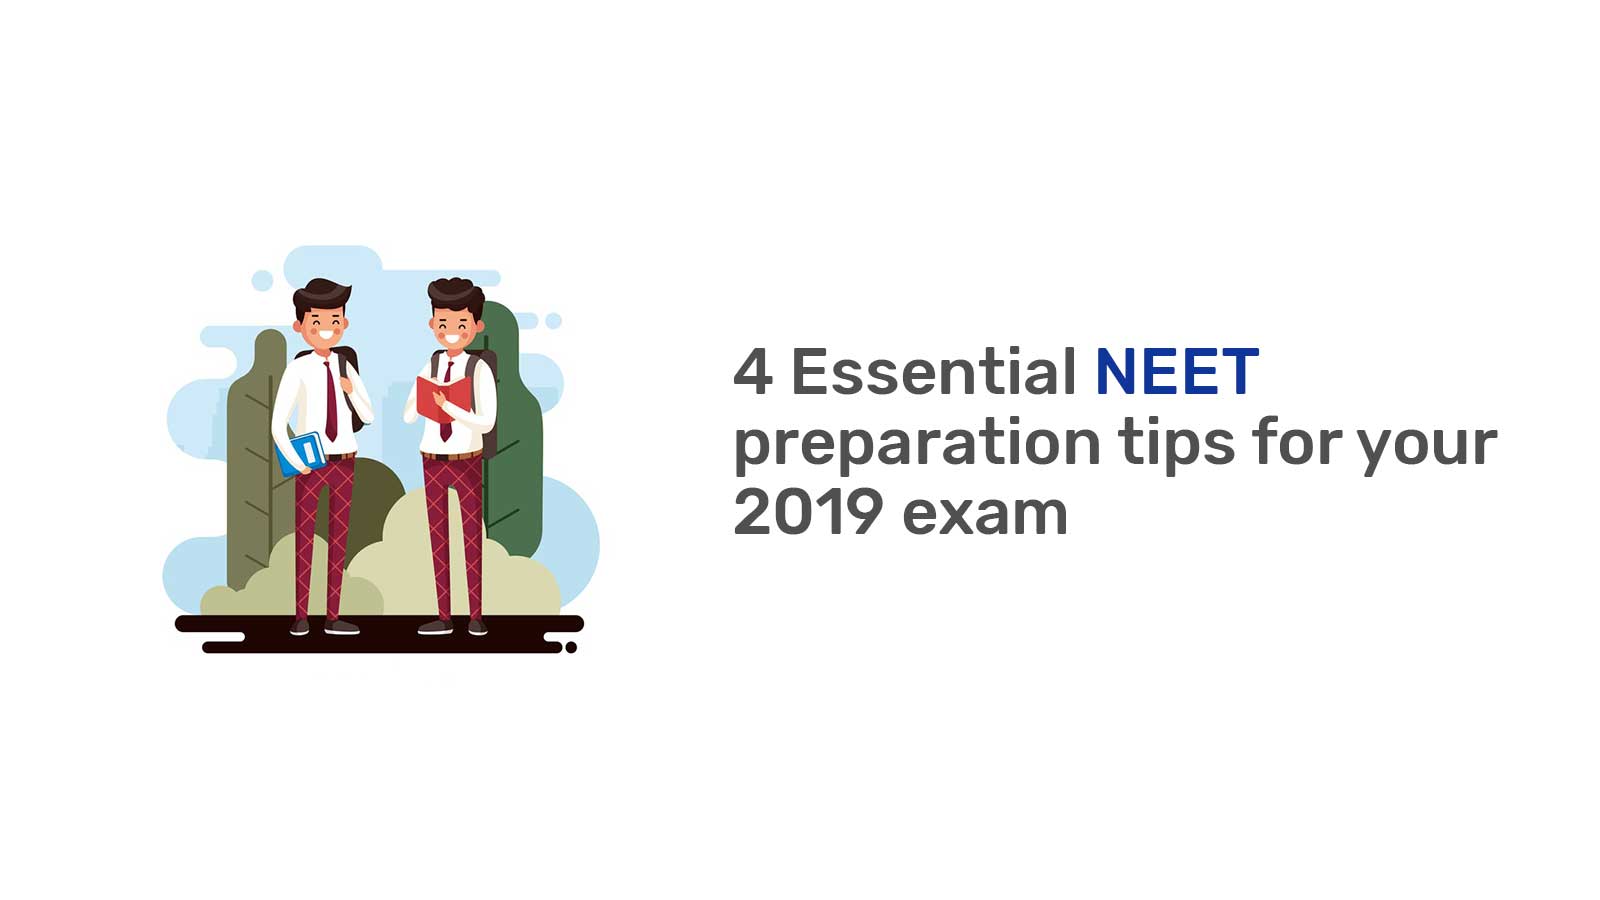 Know the 15 NEET Topper Strategy to Score Good Marks